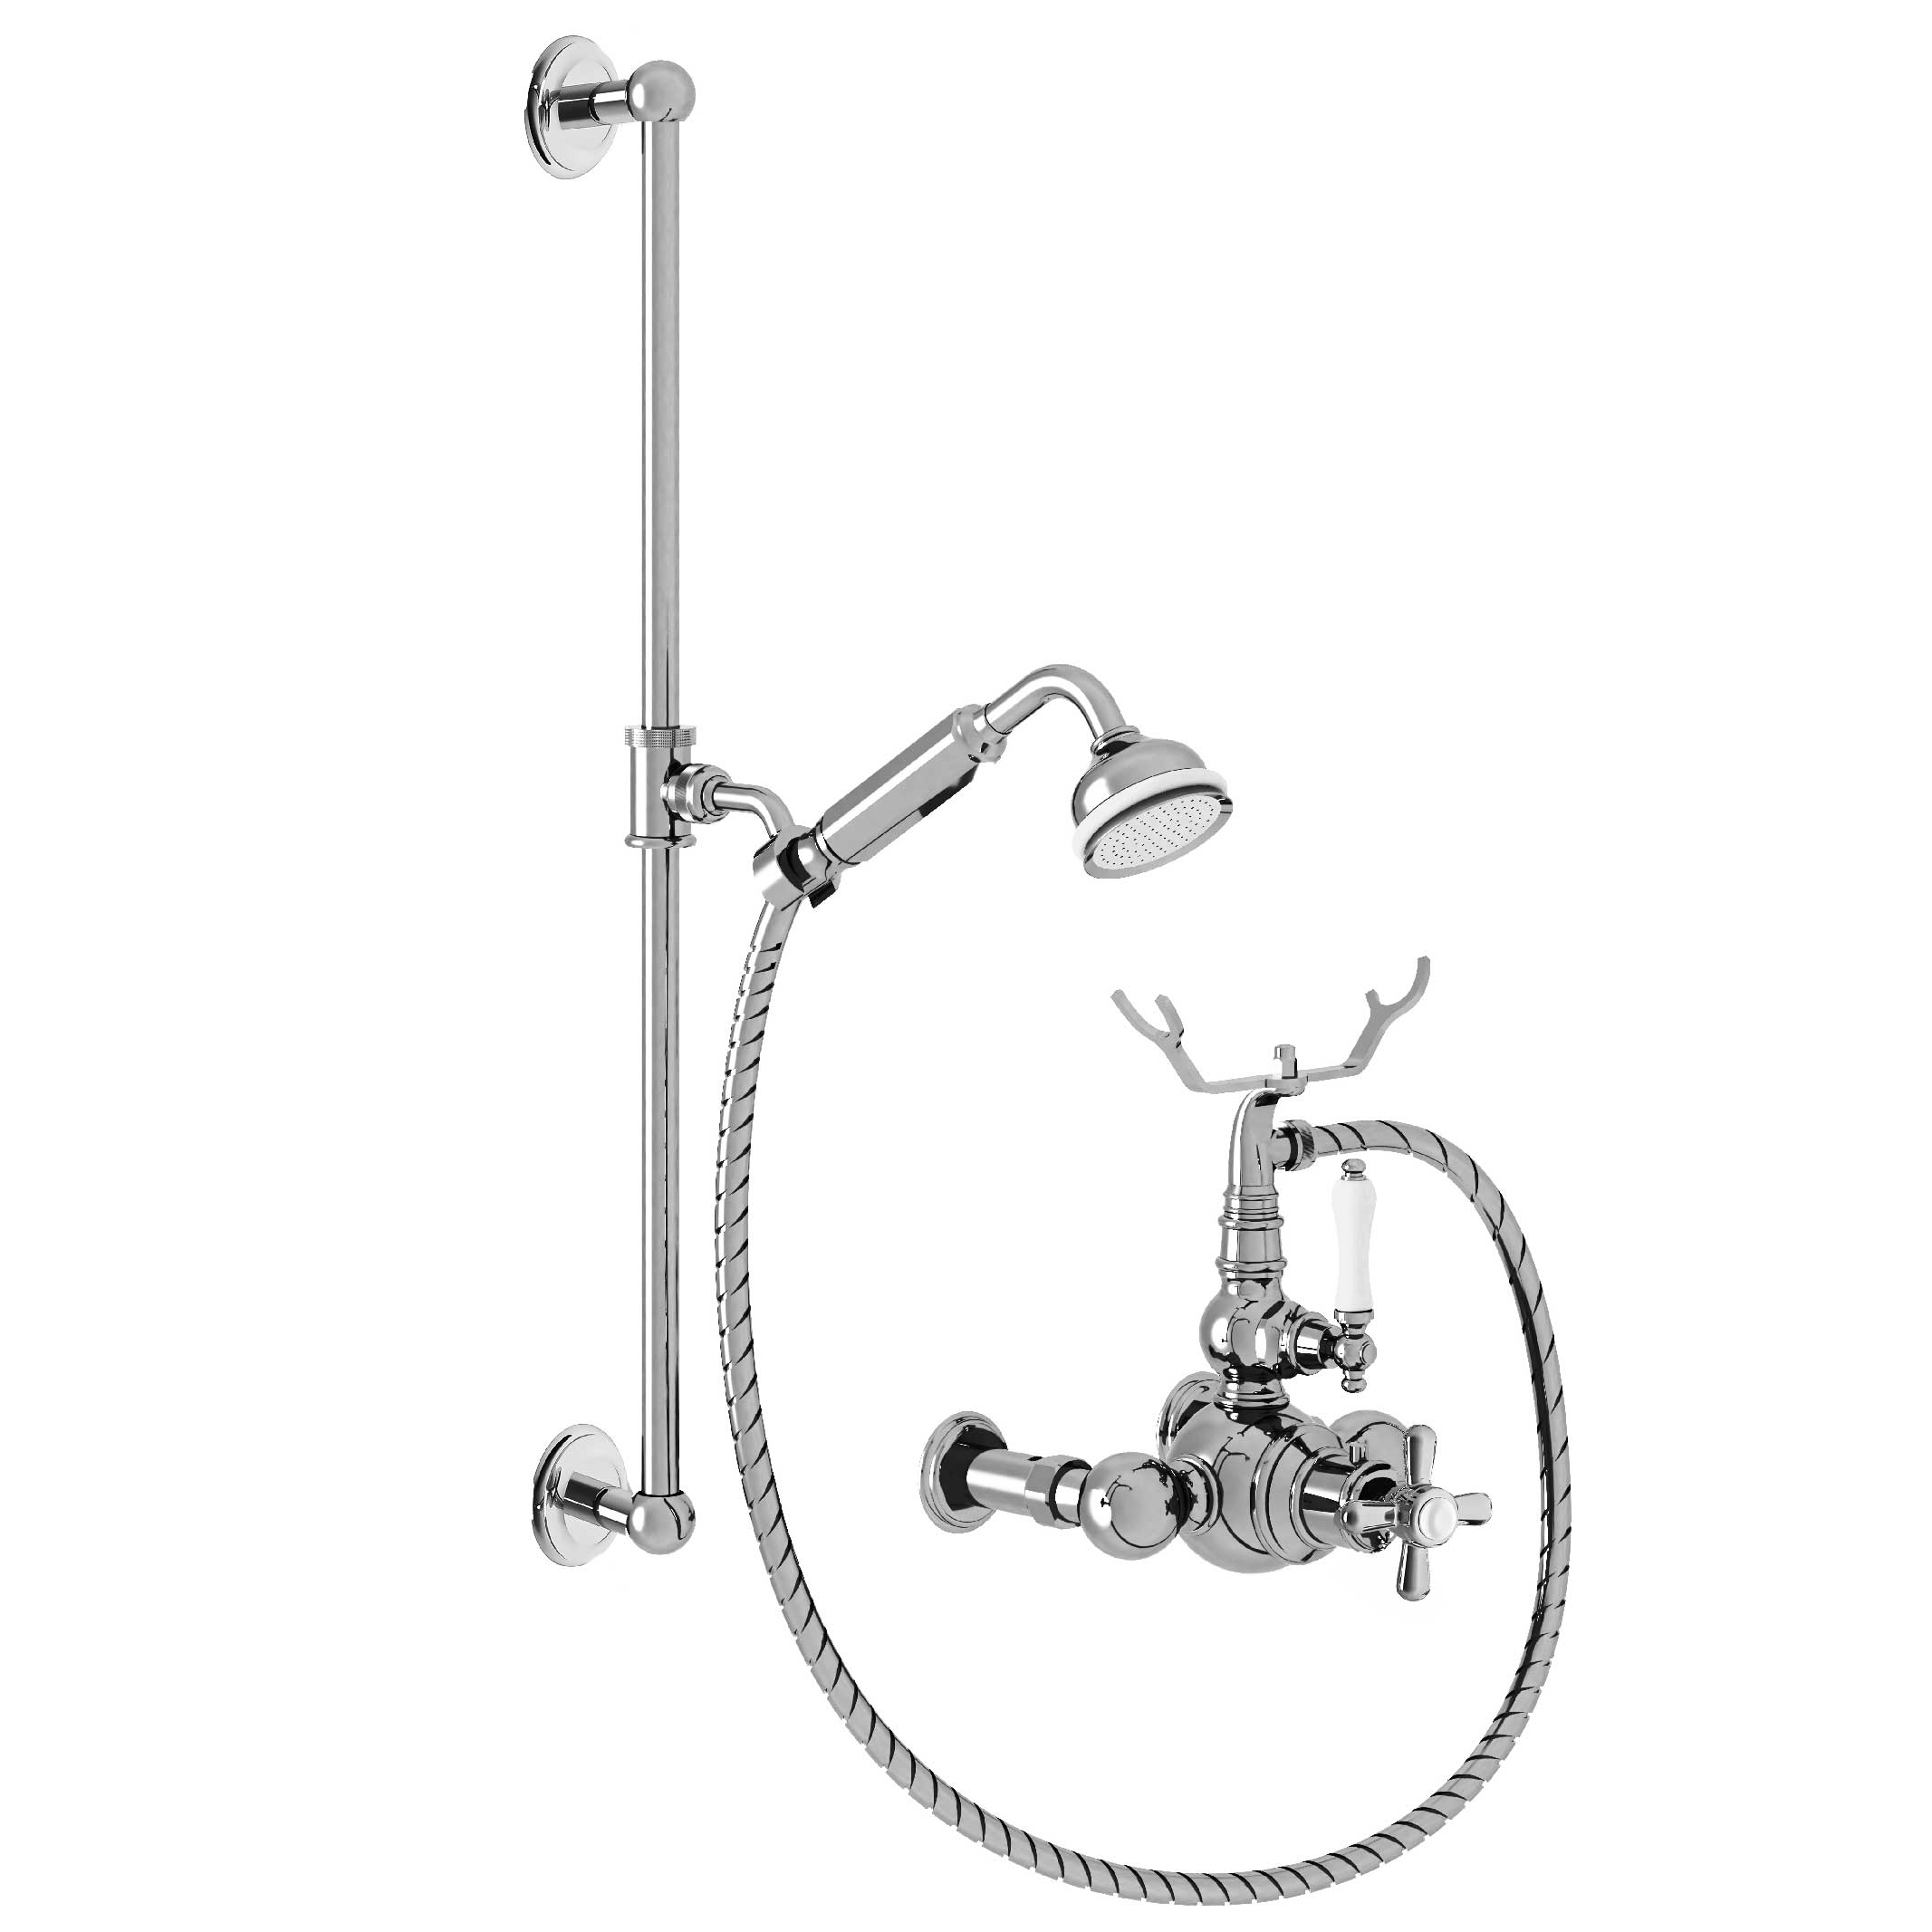 M40-2202T Thermo. shower mixer with sliding bar